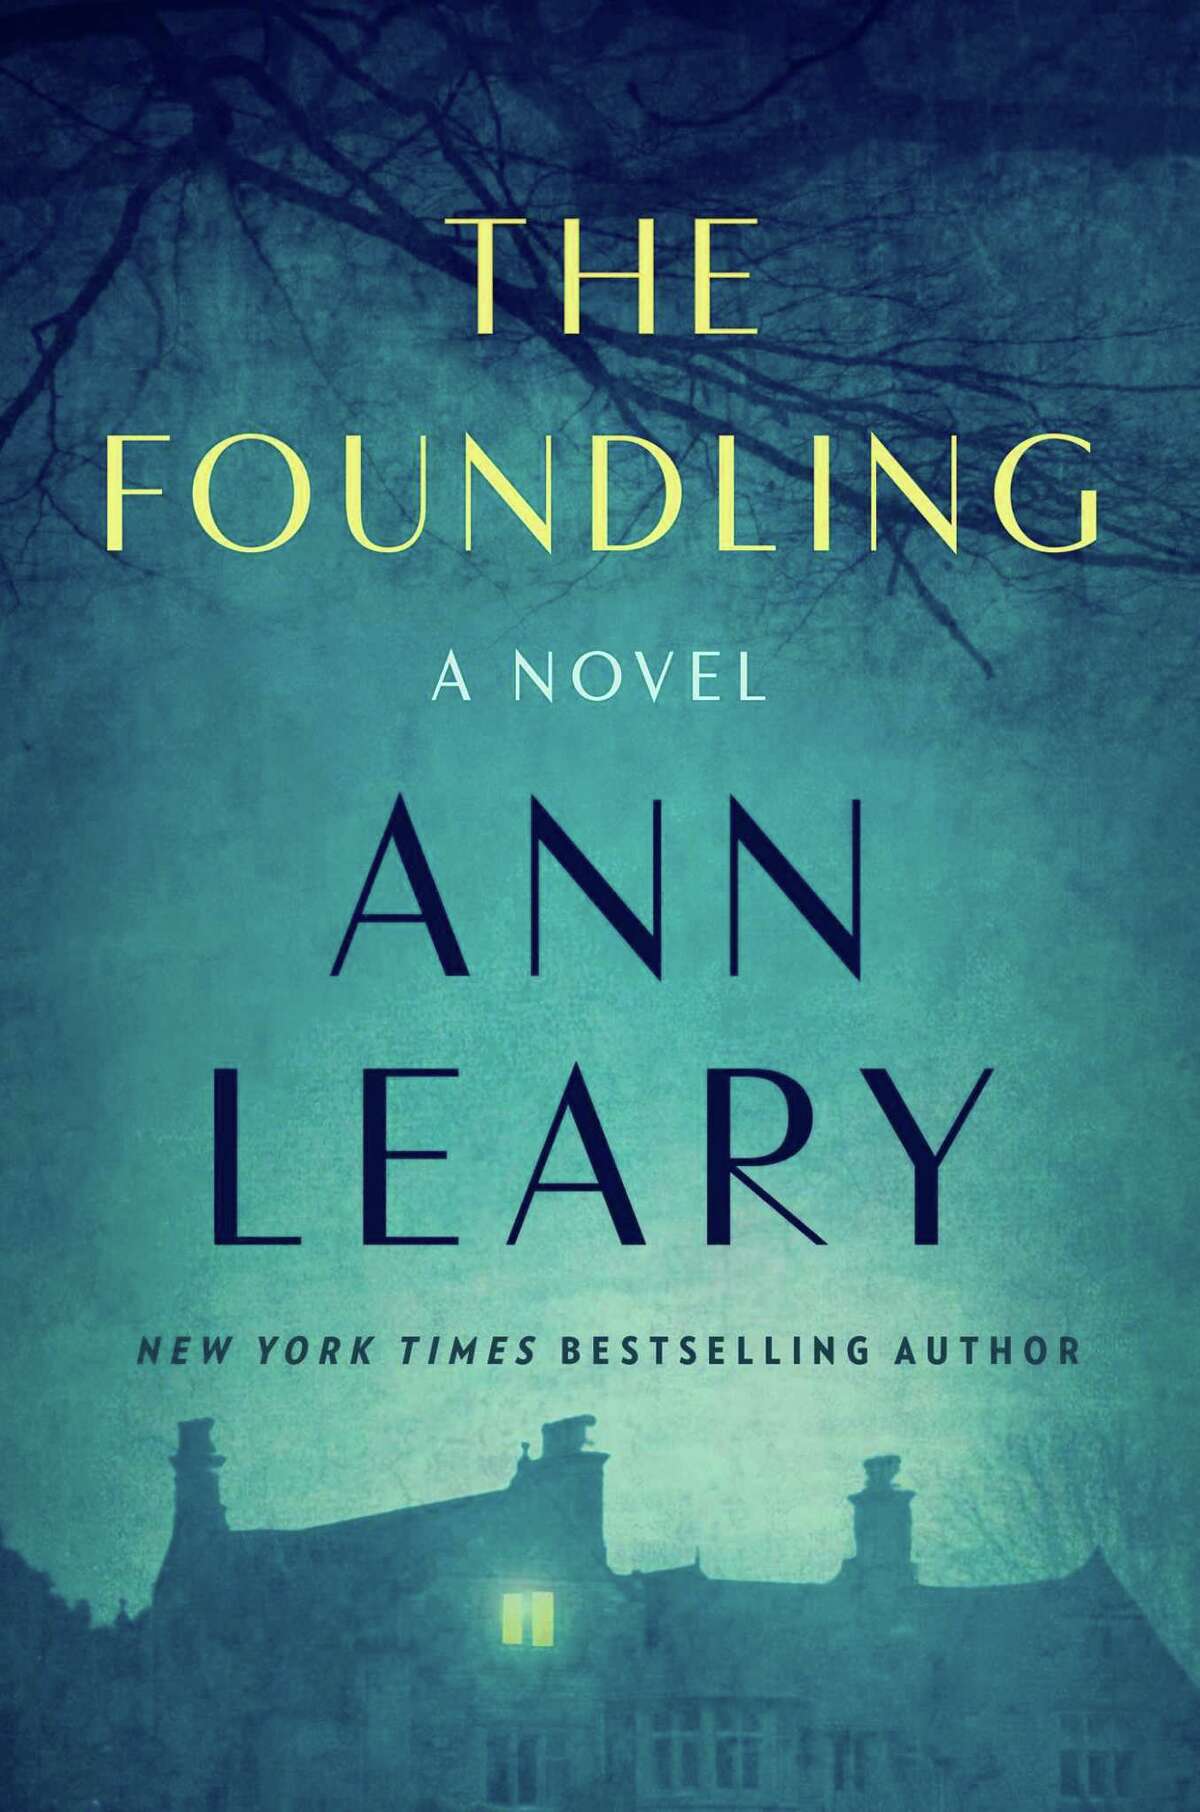 New York Times bestselling author Ann Leary will read from her new novel, “The Foundling,” at 3 p.m. June 18.